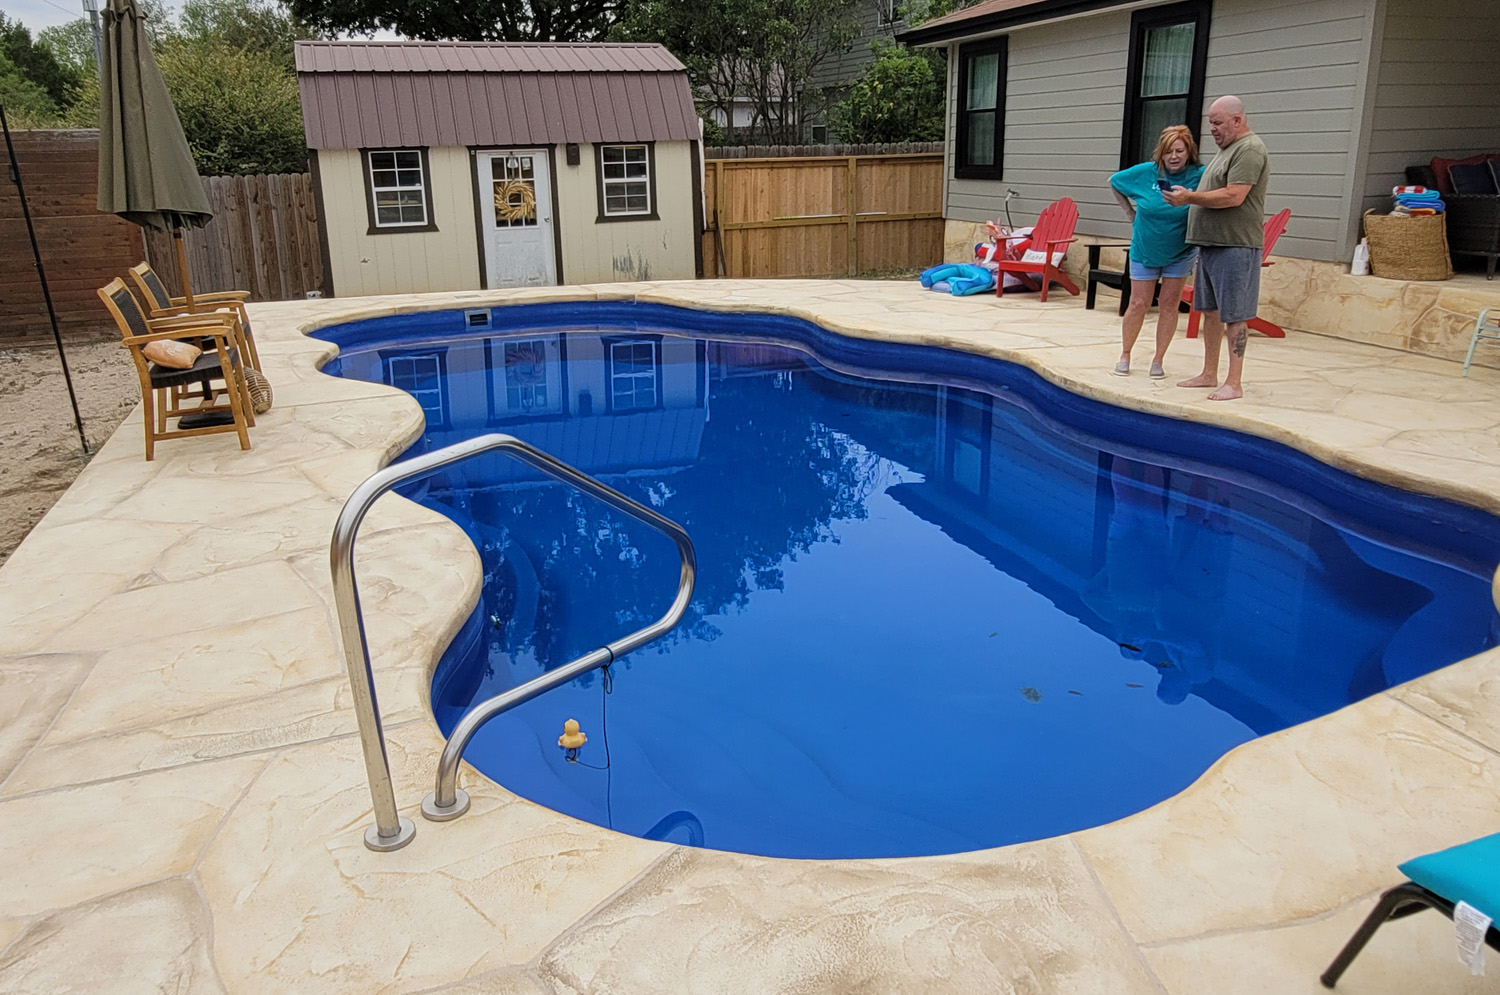 Lonestar Inground Fiberglass Pools Shavano Park Texas Manufacturing Pool for a private backyard oasis and staycation without the hassle